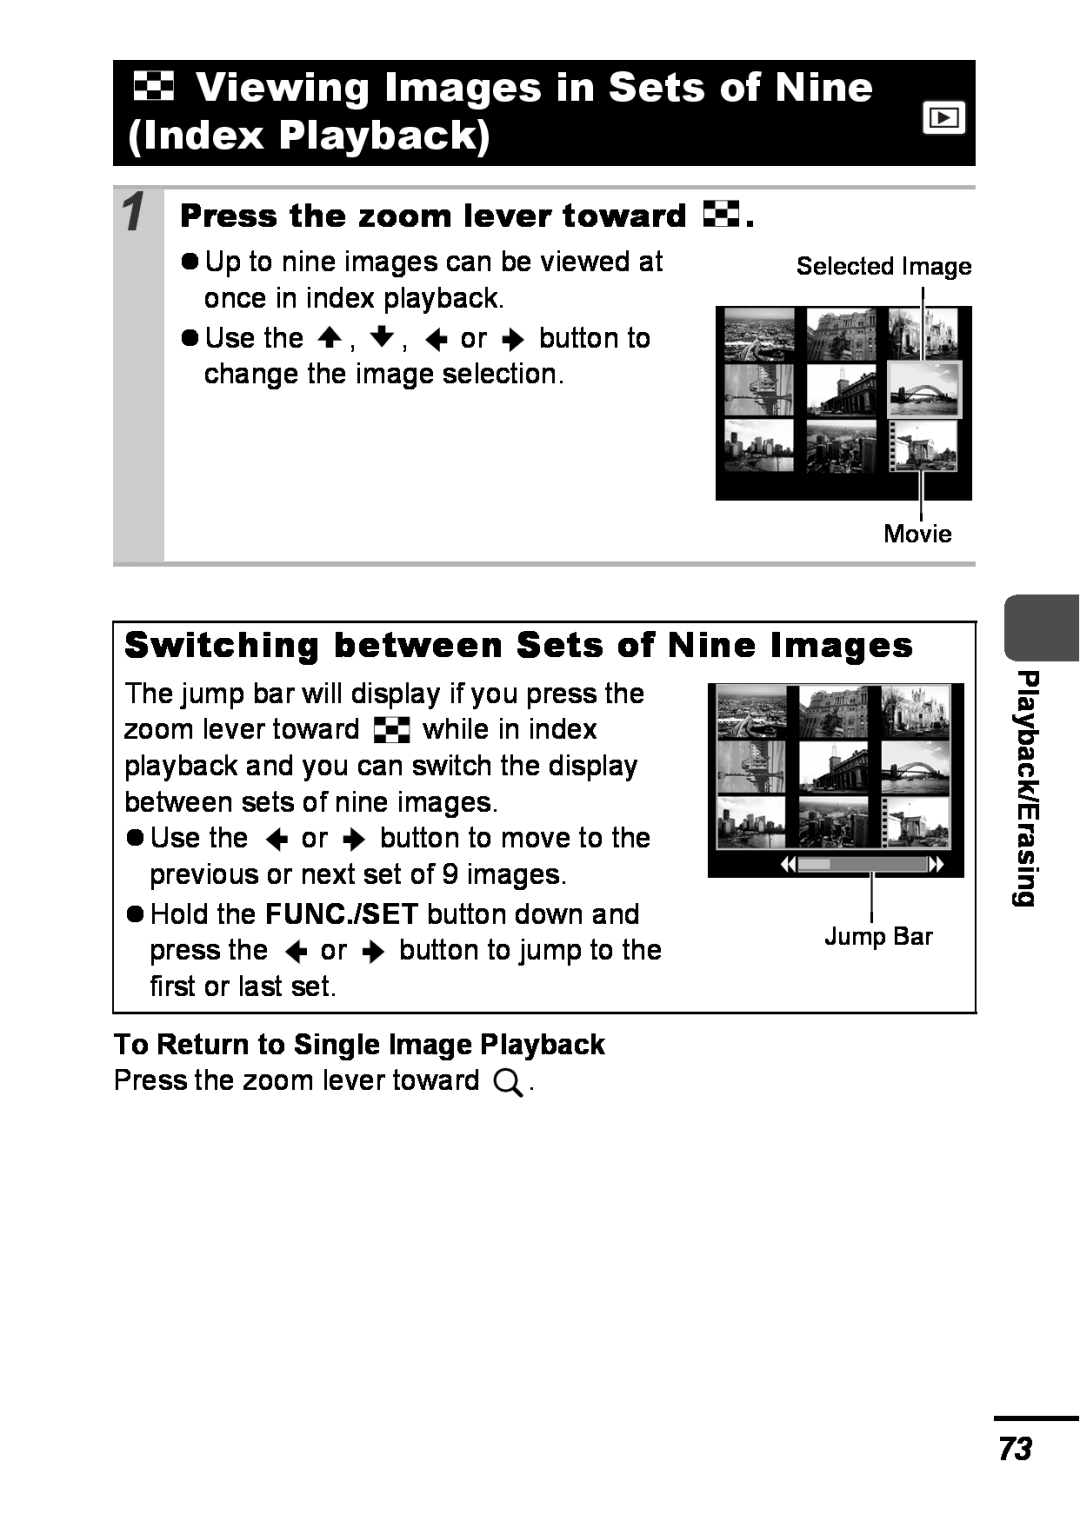 Canon A540 appendix Viewing Images in Sets of Nine Index Playback, Switching between Sets of Nine Images, Playback/Erasing 